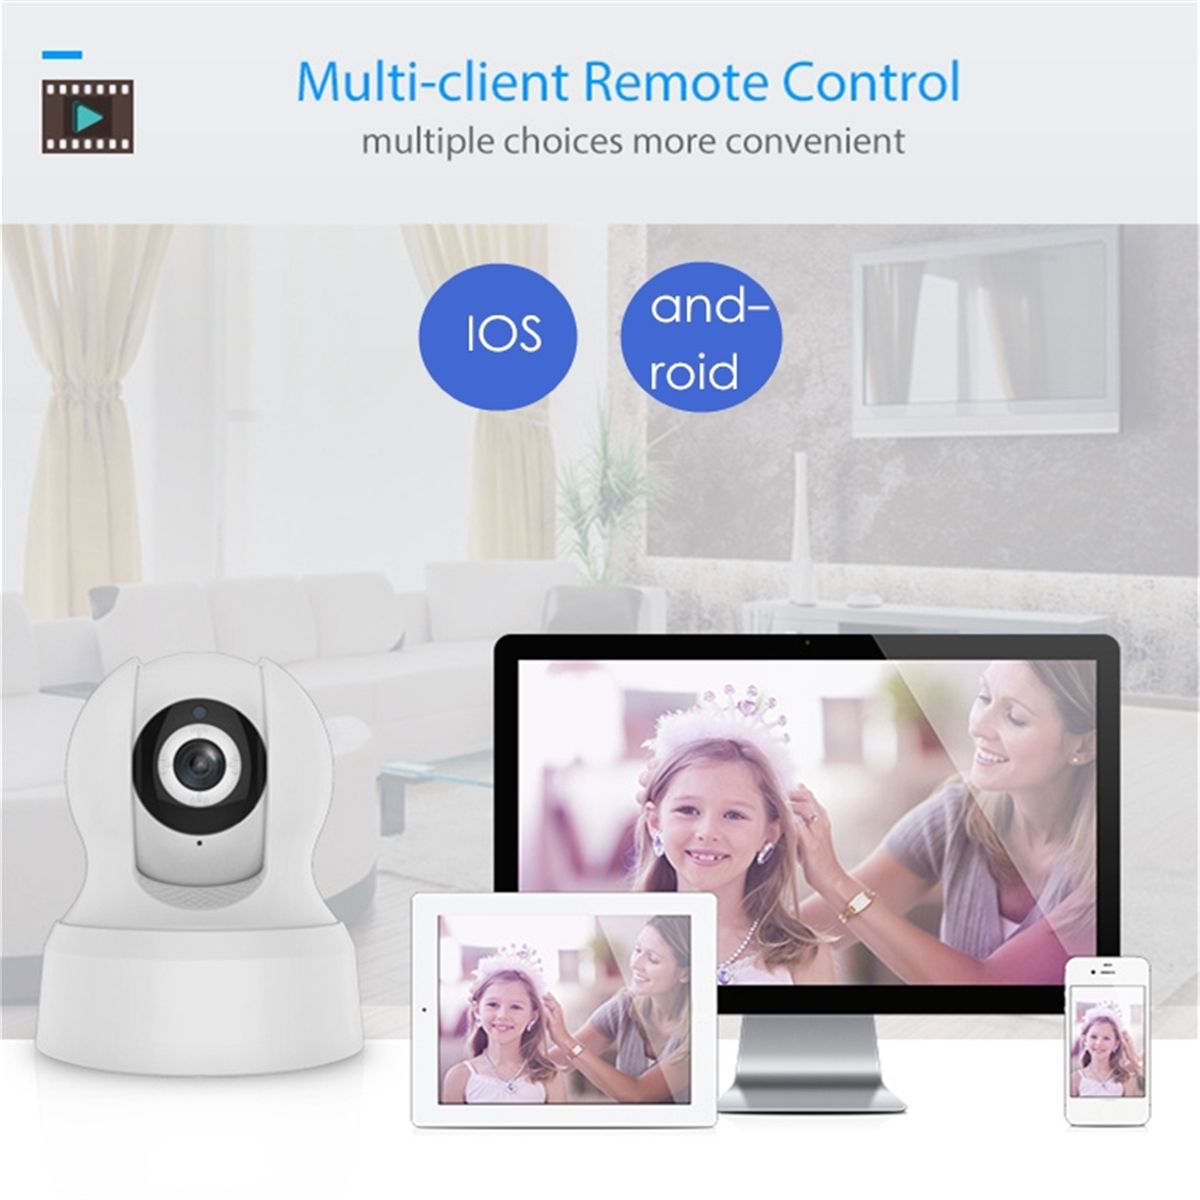 HD-Night-Vision-Wireless-WiFi-Smart-Home-Security-IP-Camera-Video-Baby-Dog-Monitor-1625103